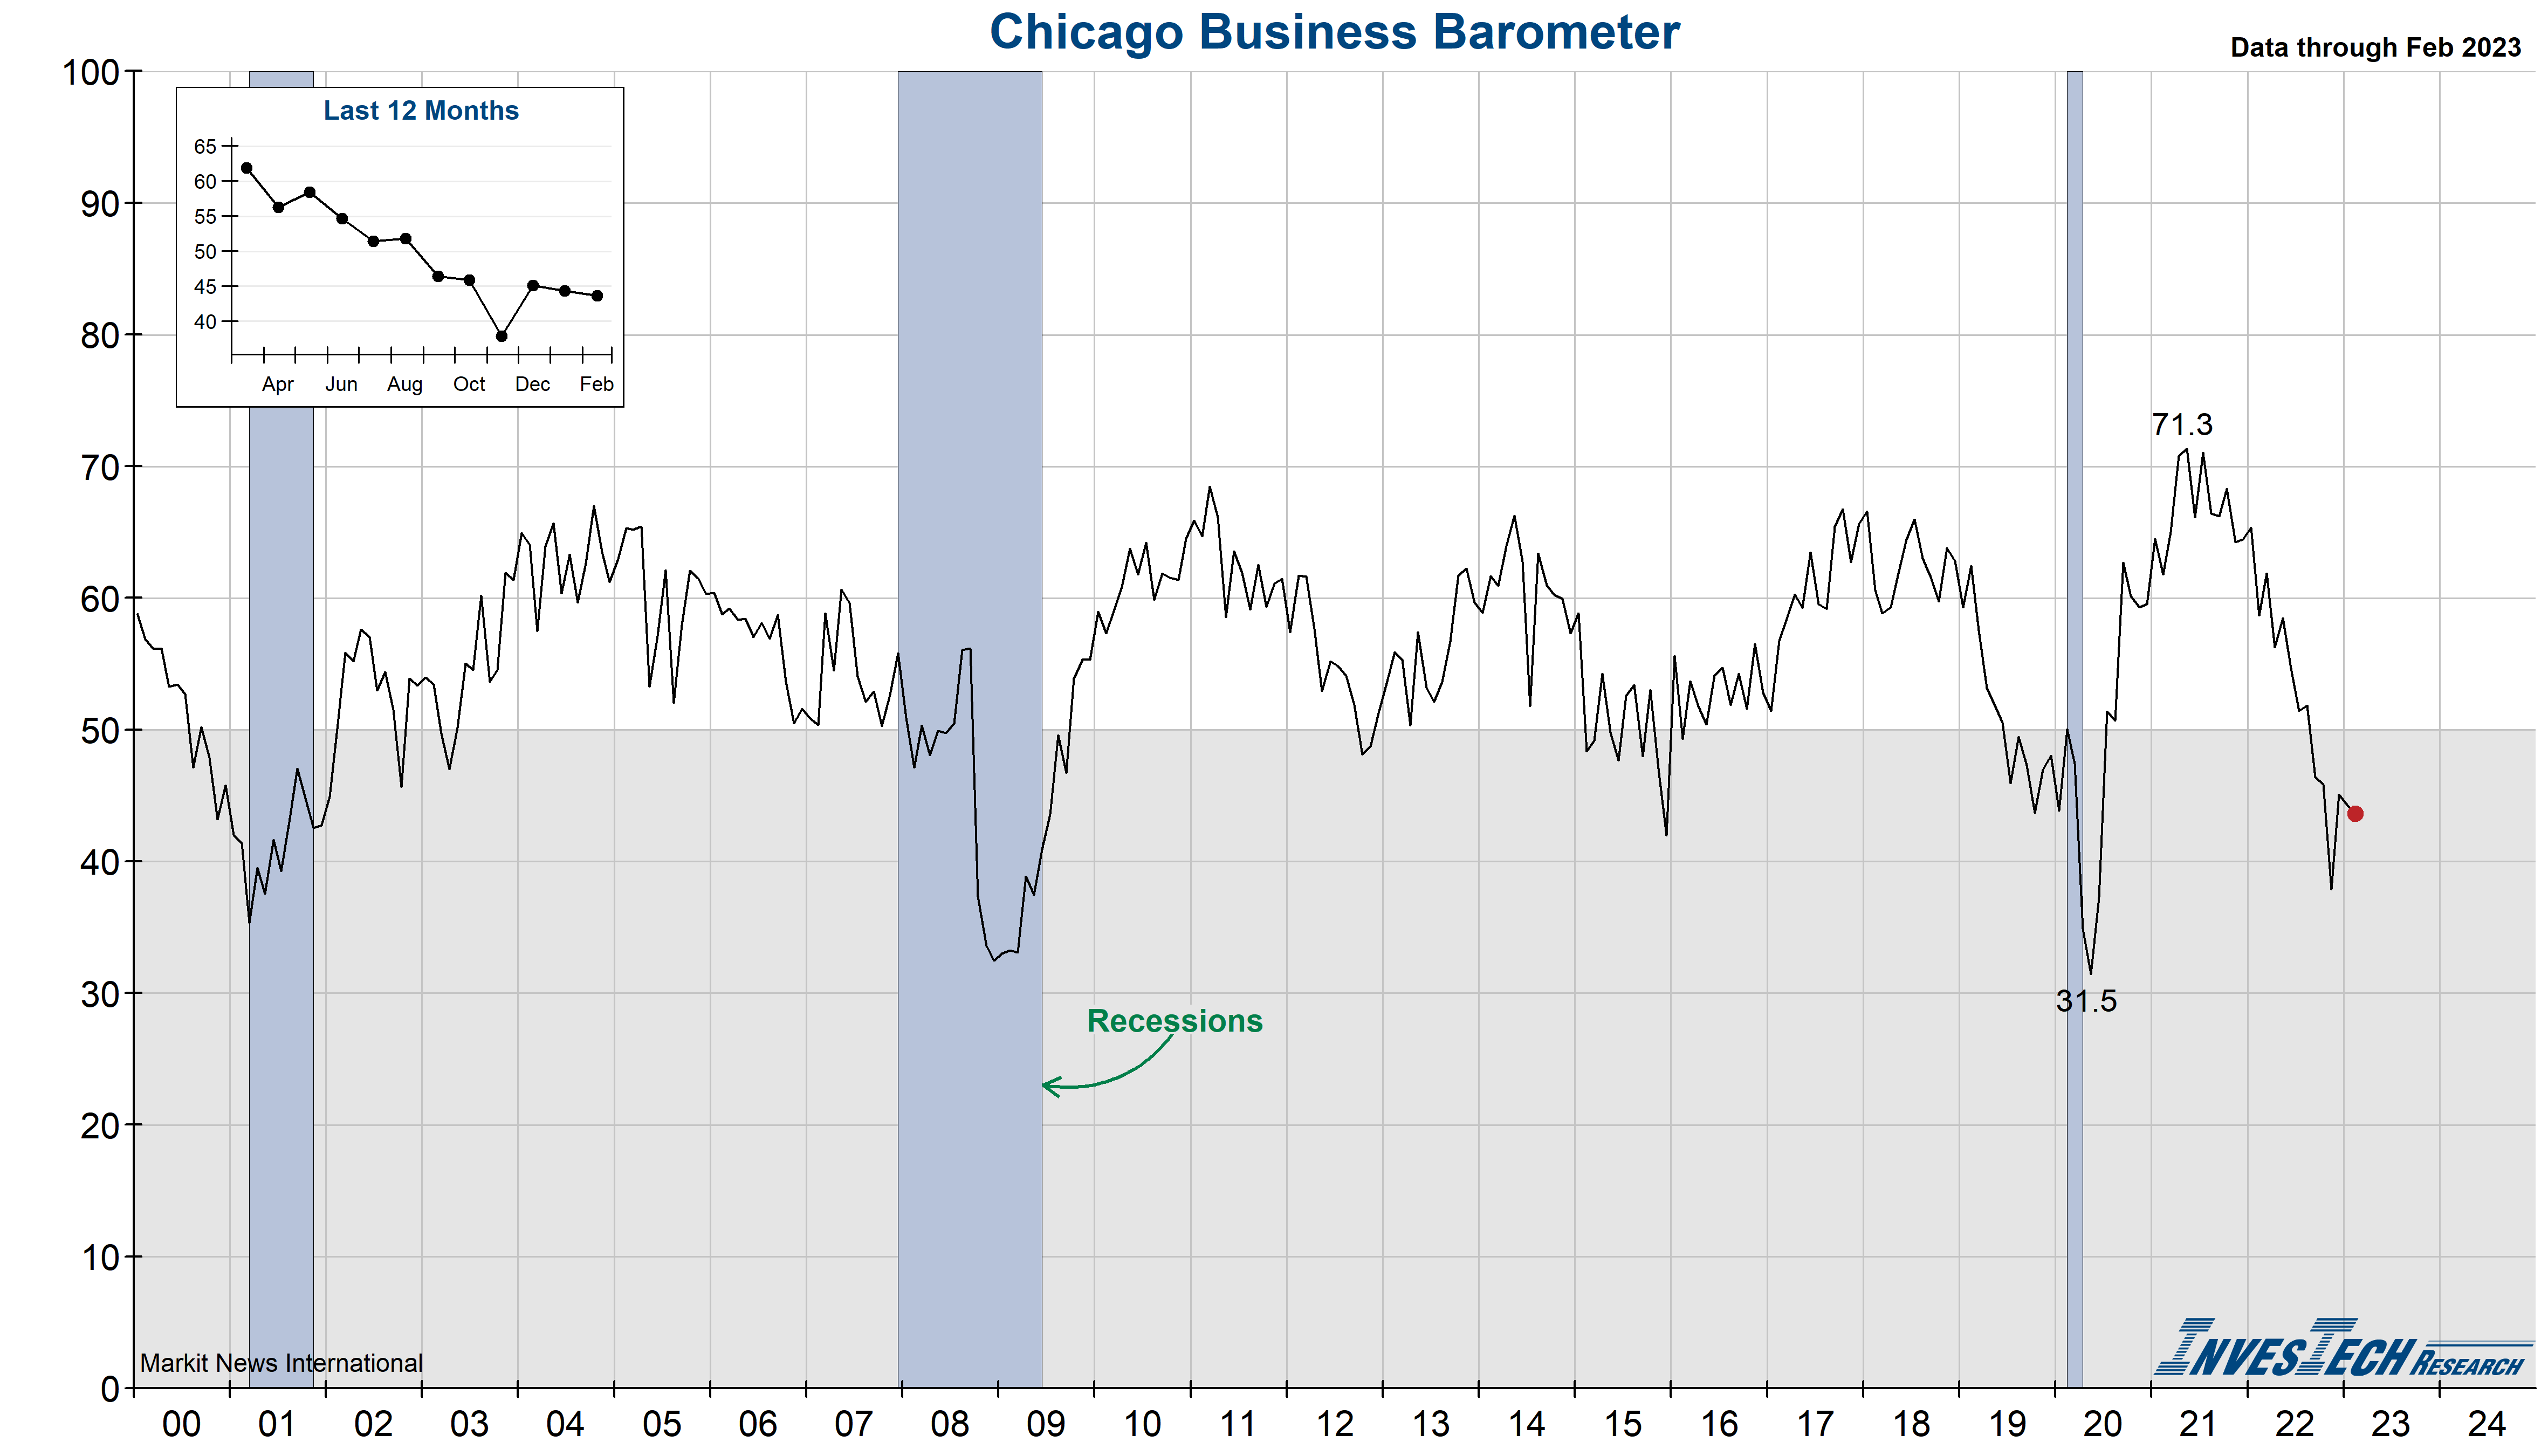 ISM Chicago Business Barometer (Chicago Purchasing Manager’s Index)